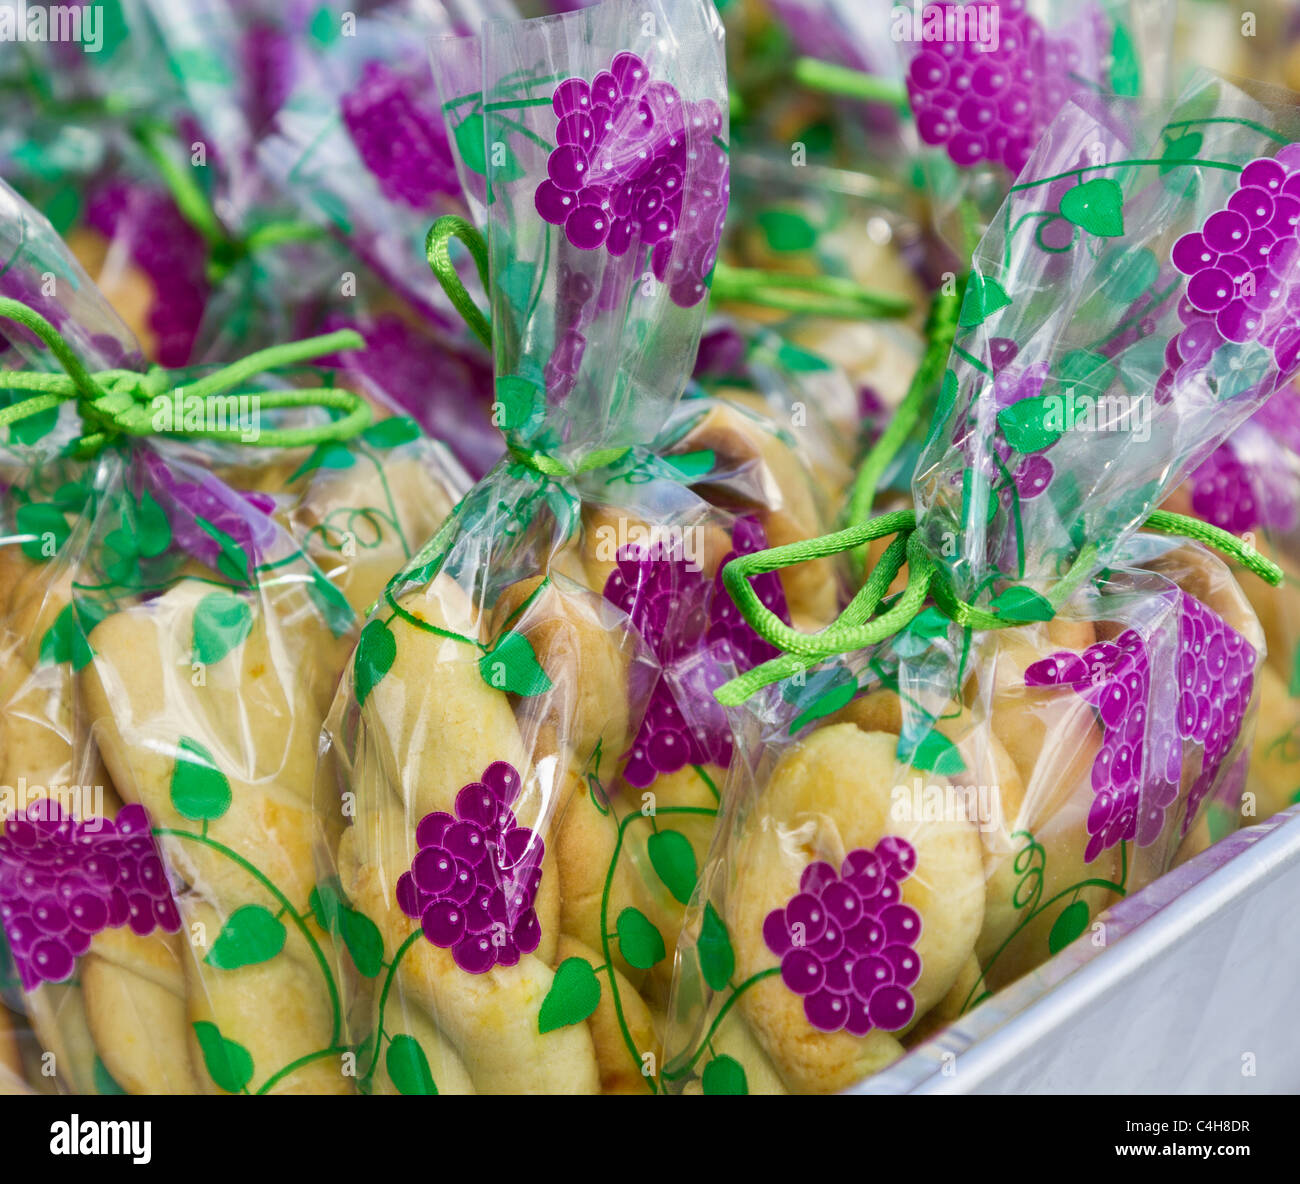 Koulourakia, traditional butter cookie of Greece, is gaily wrapped and tied for sale at a Greek Festival in NJ. Horizontal close up of ethnic food. Stock Photo